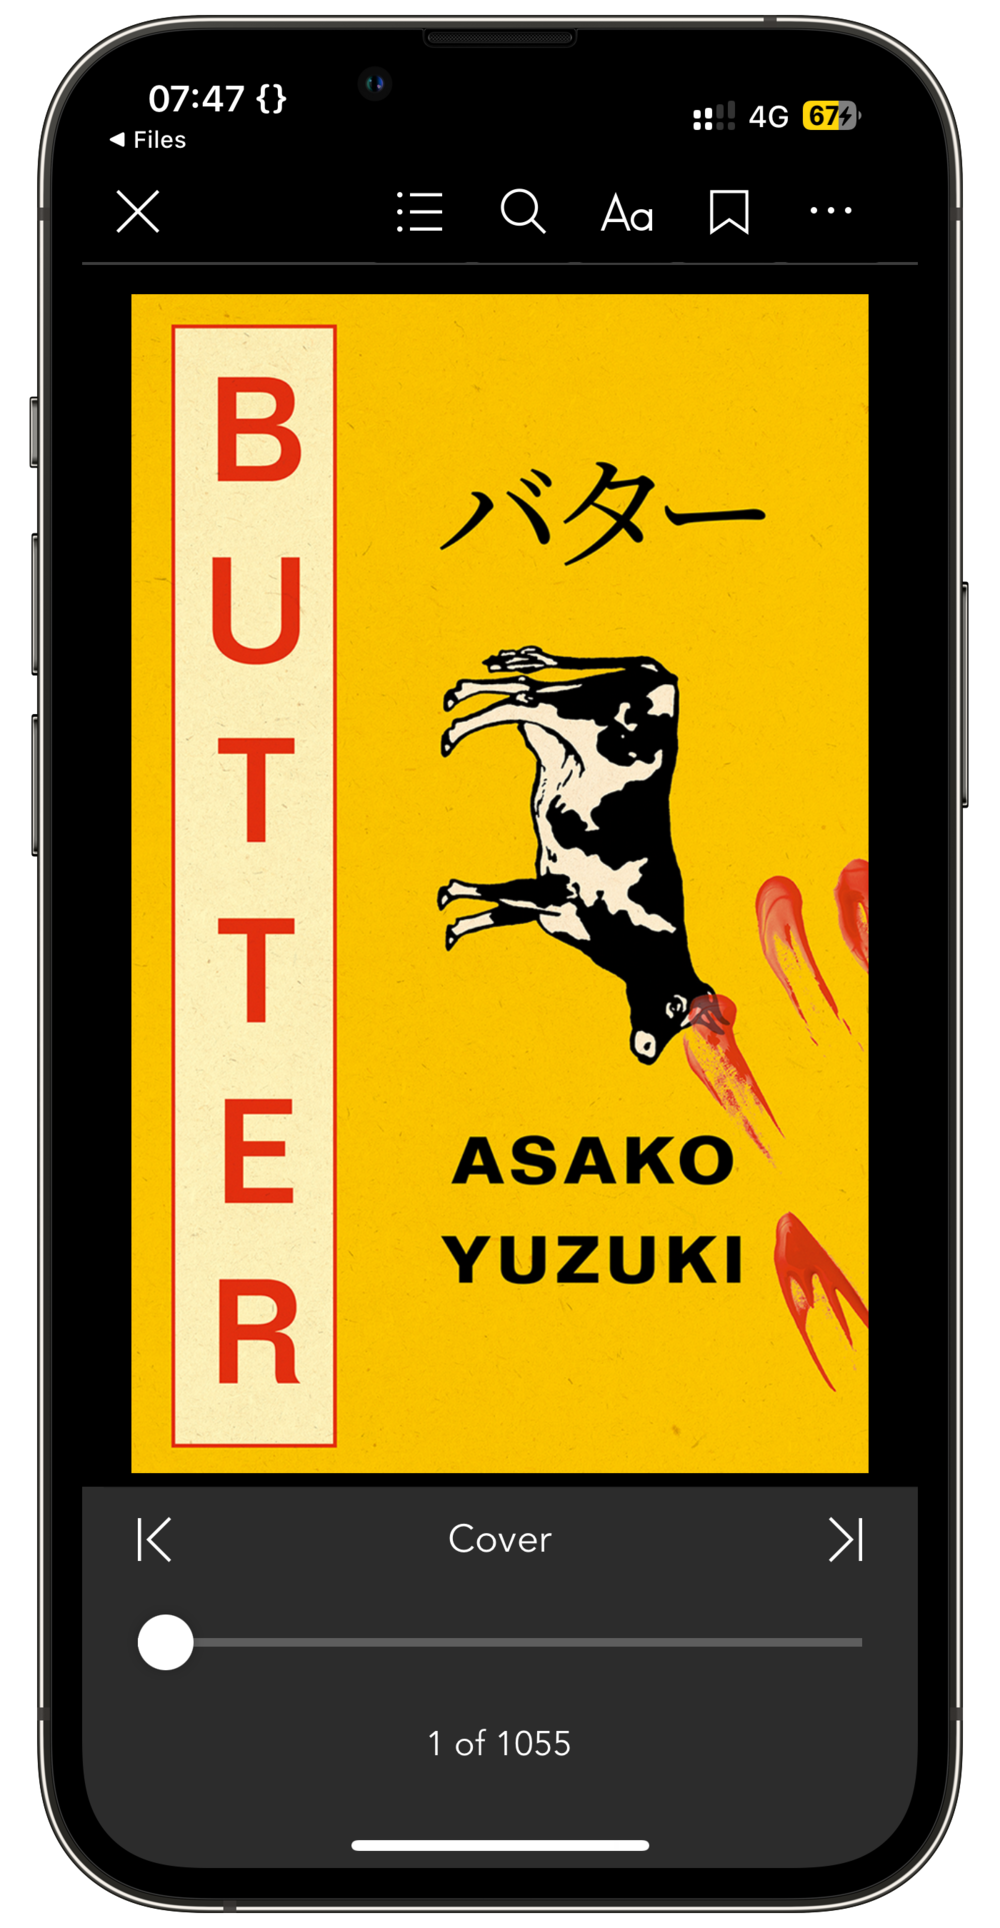 A smartphone screen displays the cover of a book titled “Butter” by Asako Yuzuki. The cover features a yellow background, a cow illustration, and red paint smears. The title “Butter” is written vertically in English on the left.